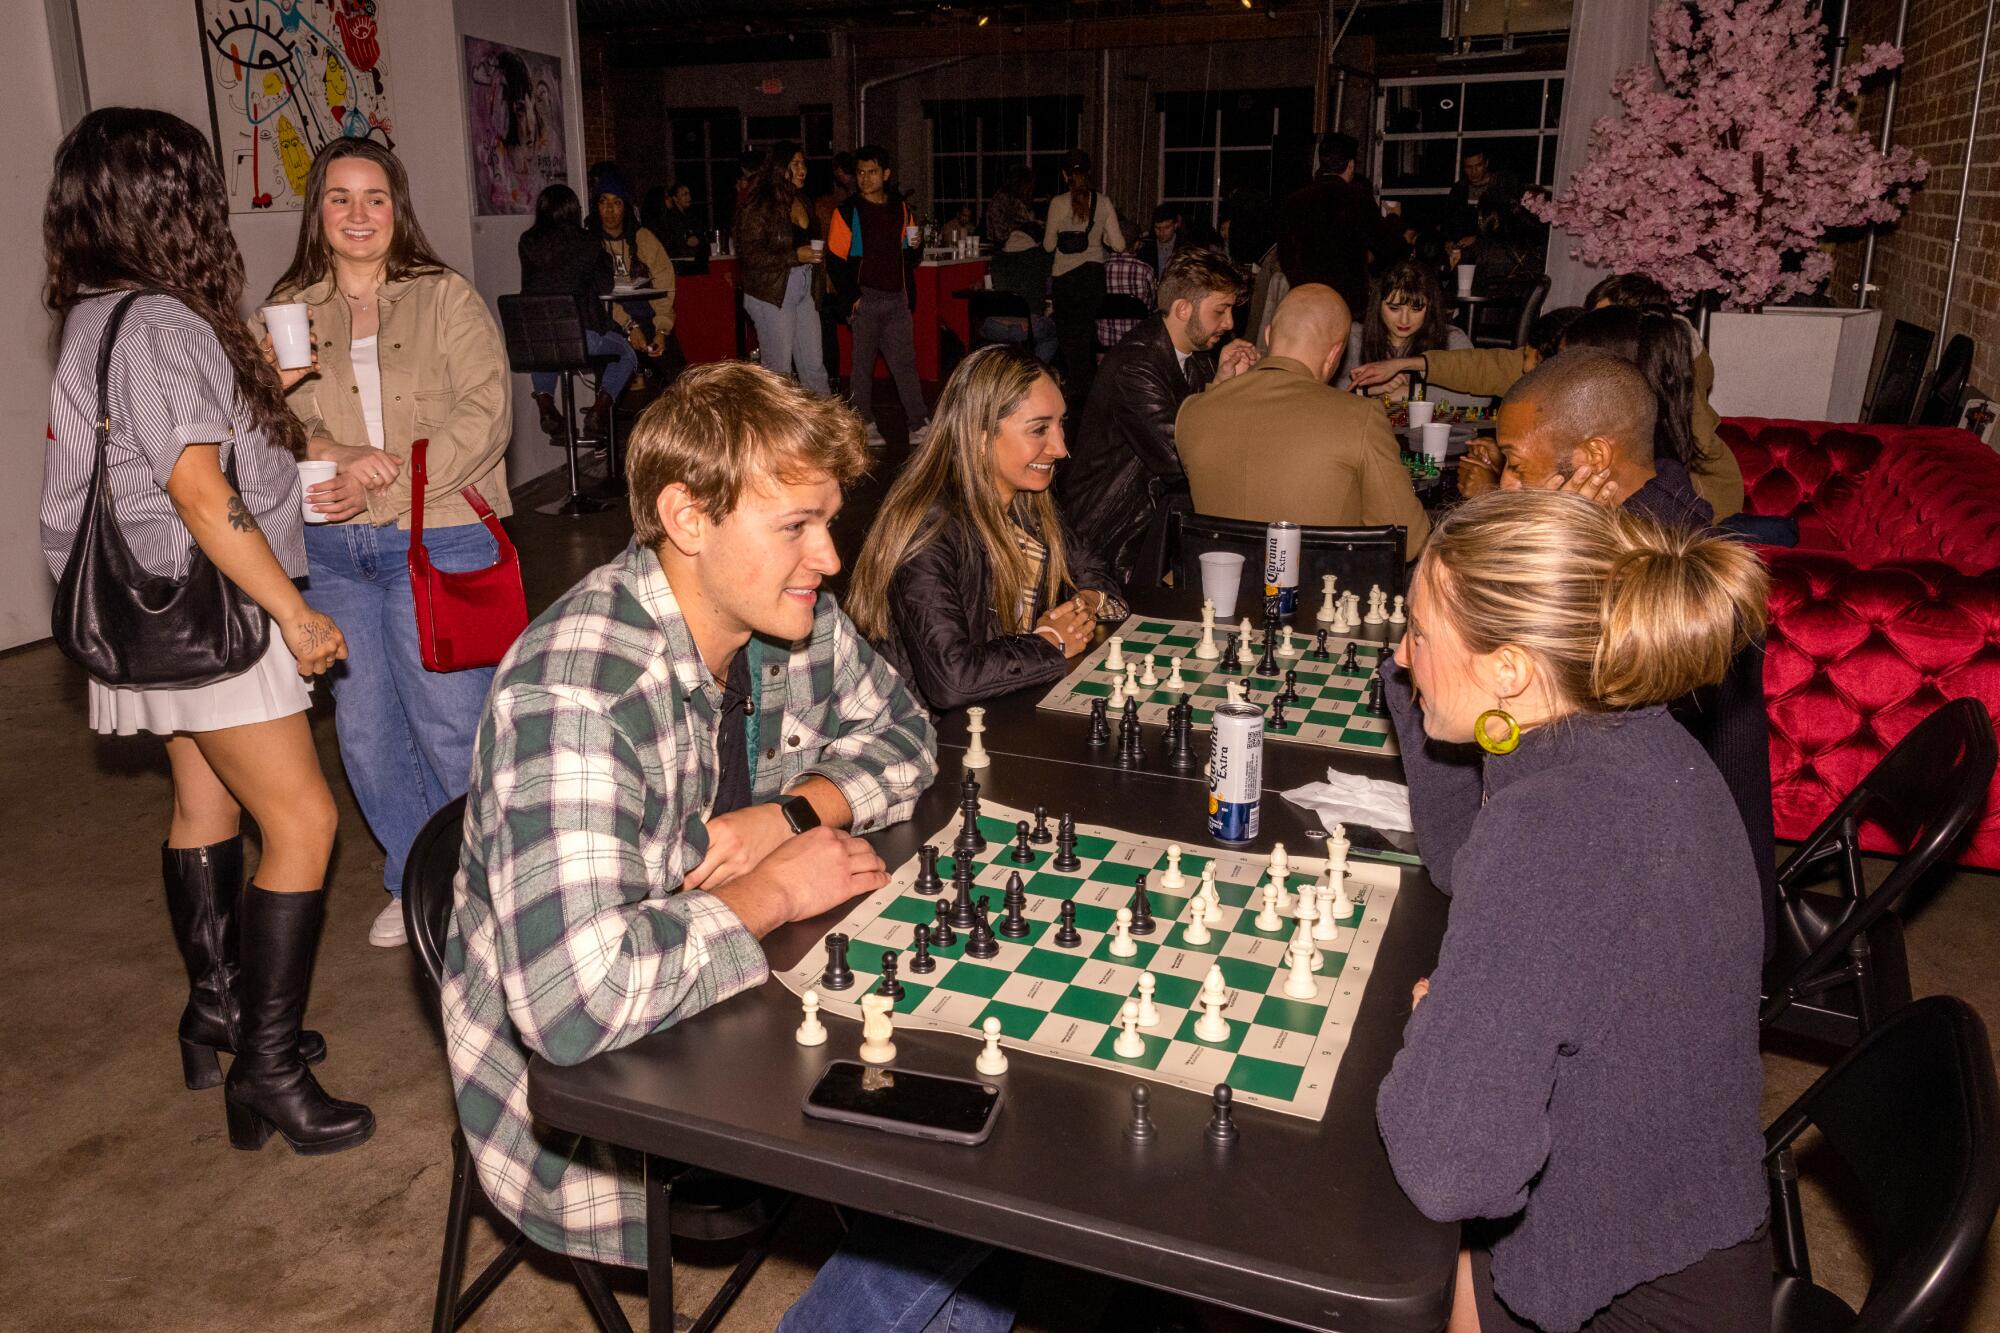 People sitting at tables socializing and playing chess.